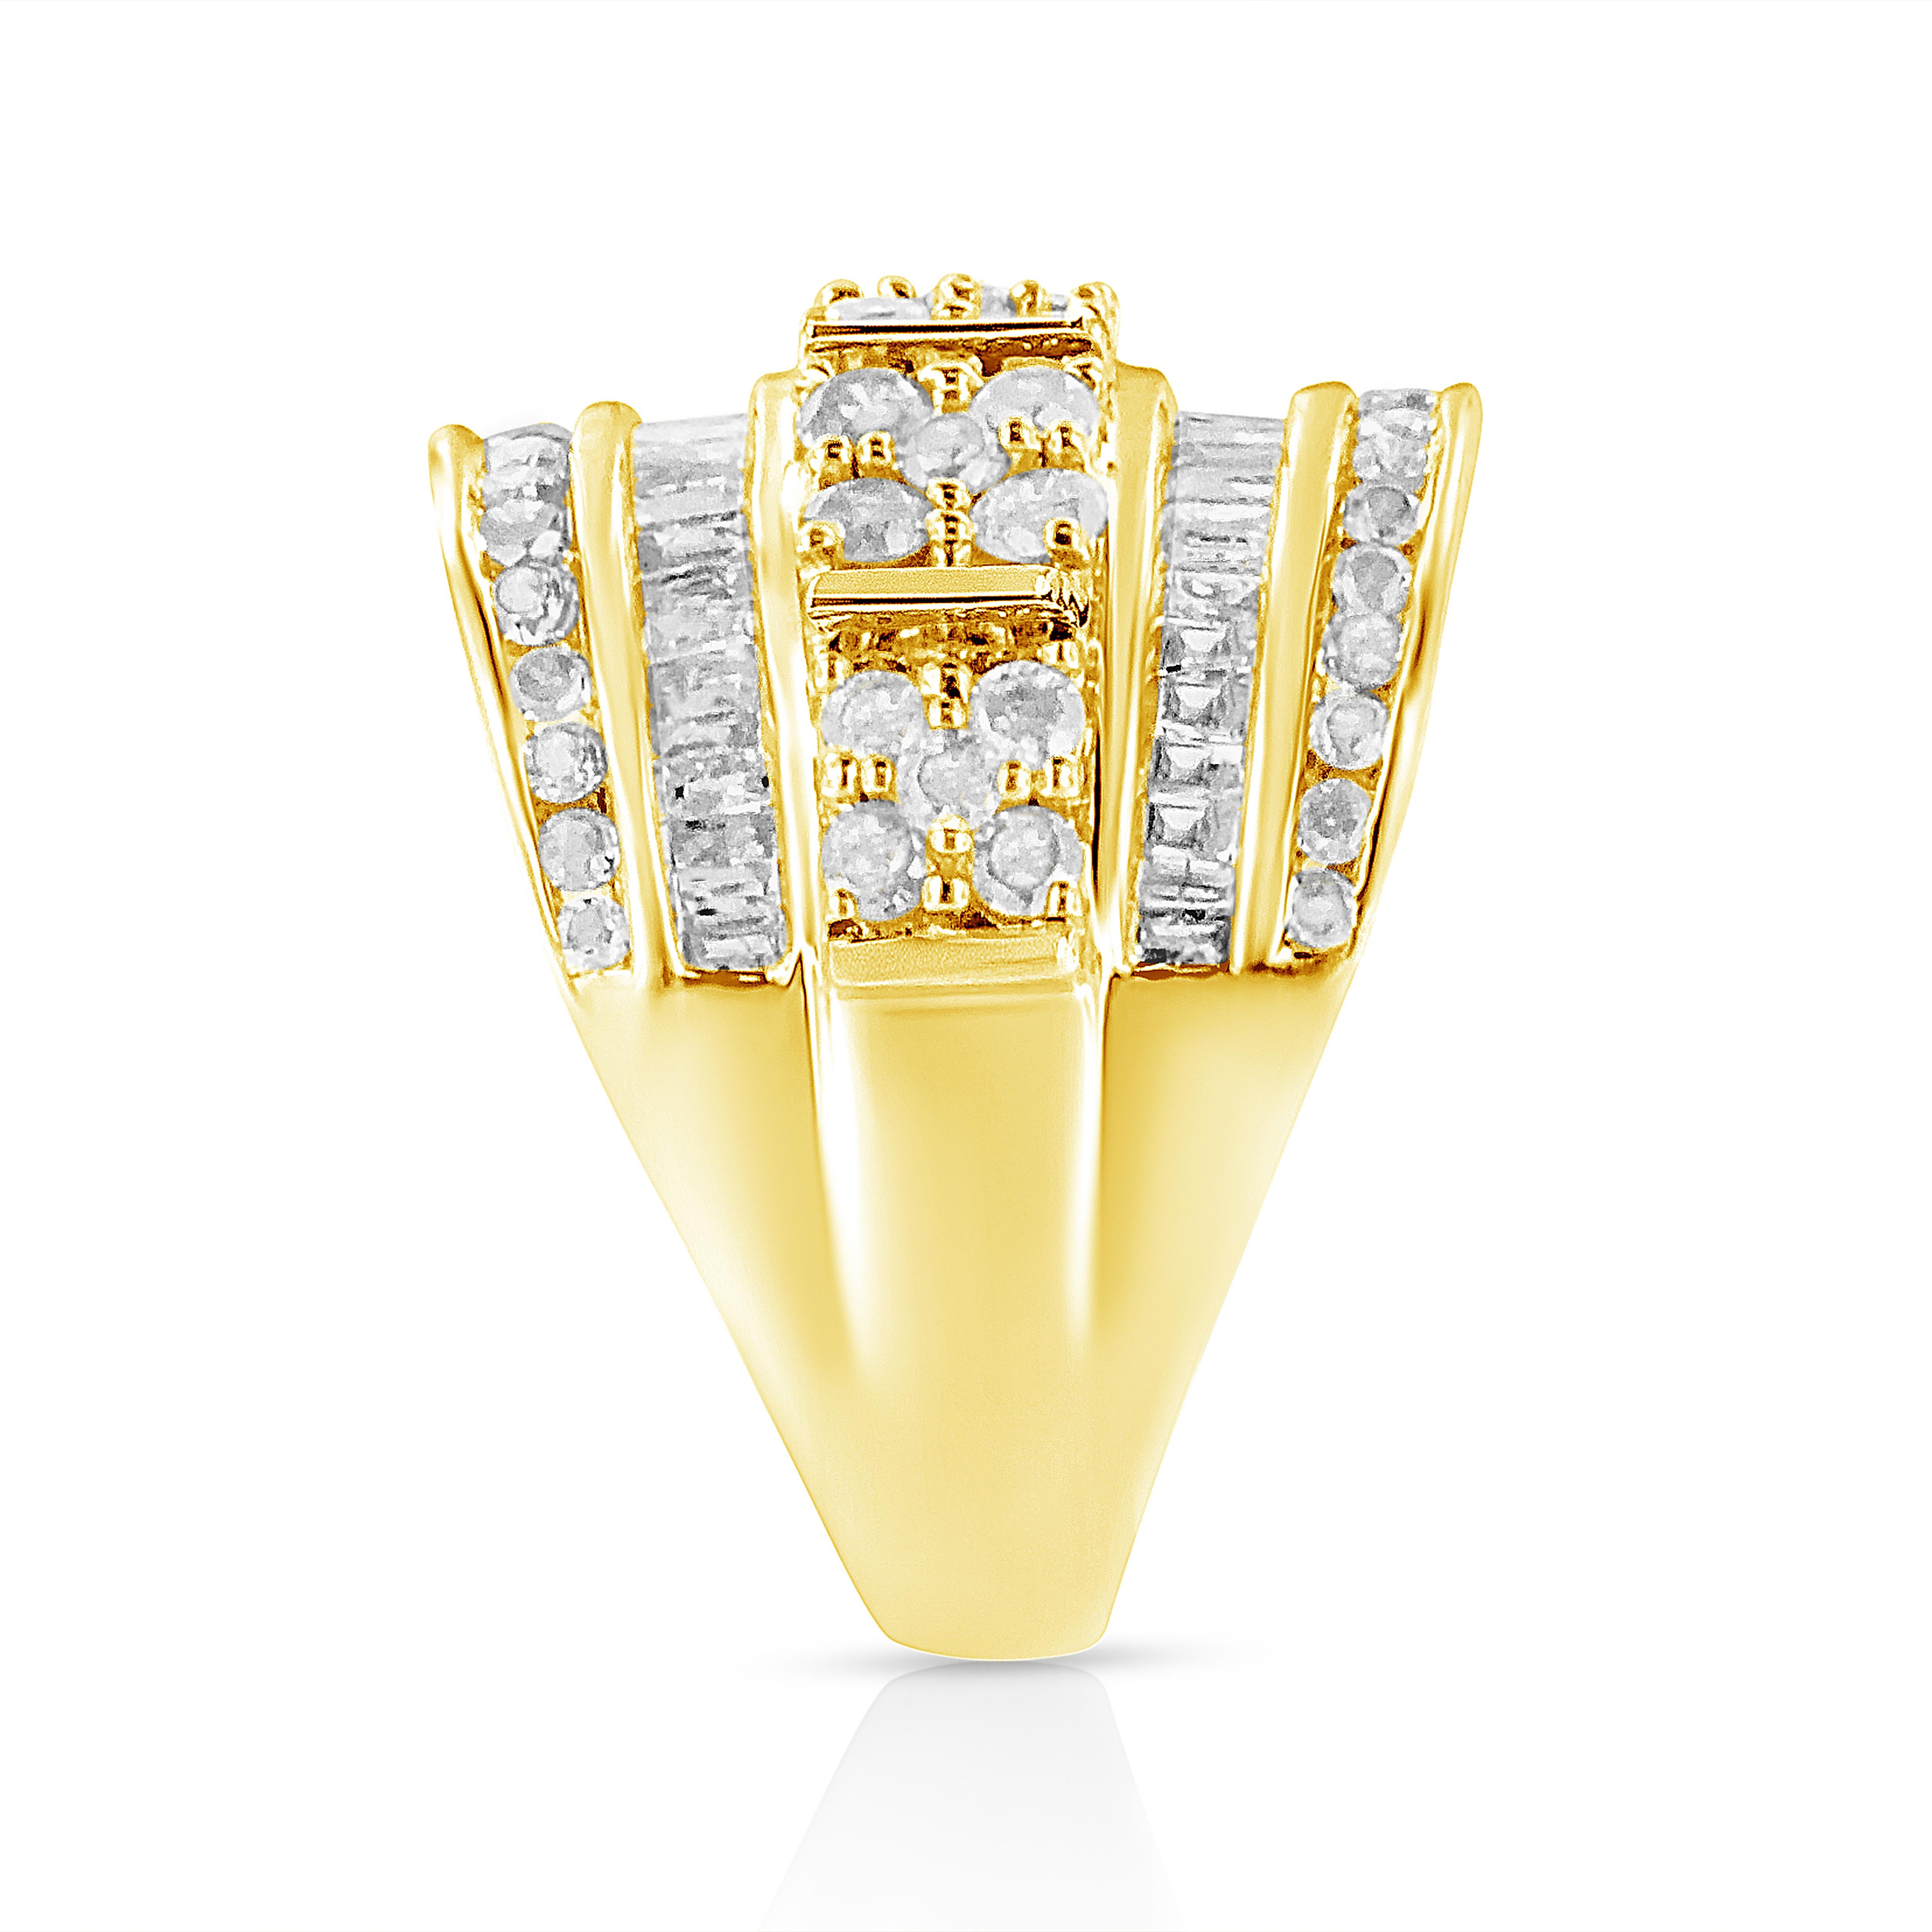 For Sale:  10k Yellow Gold over Sterling Silver 2.0 Carat Diamond Cocktail Fashion Ring 5